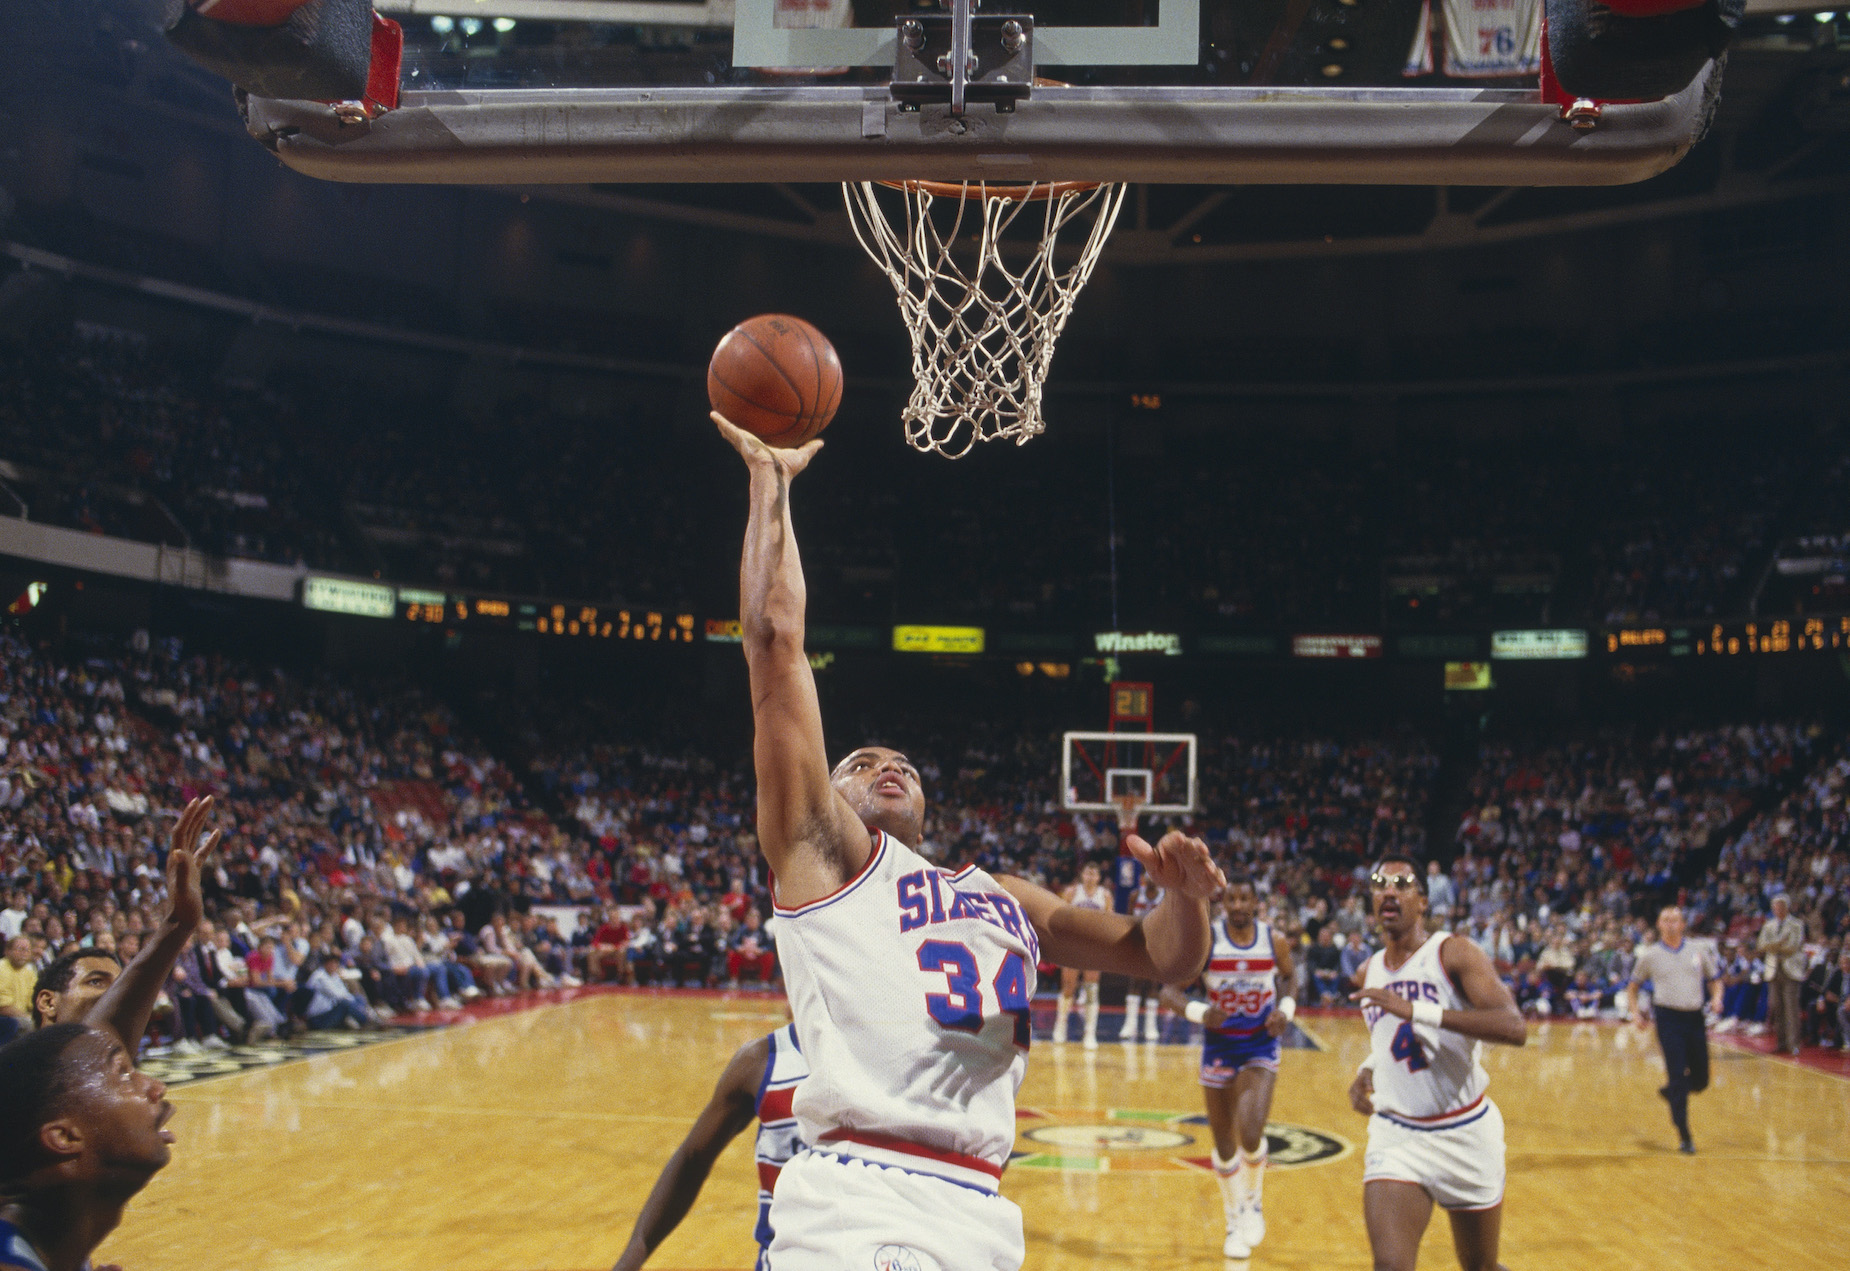 Philadelphia 76ers forward Charles Barkley goes up for a lay-up.